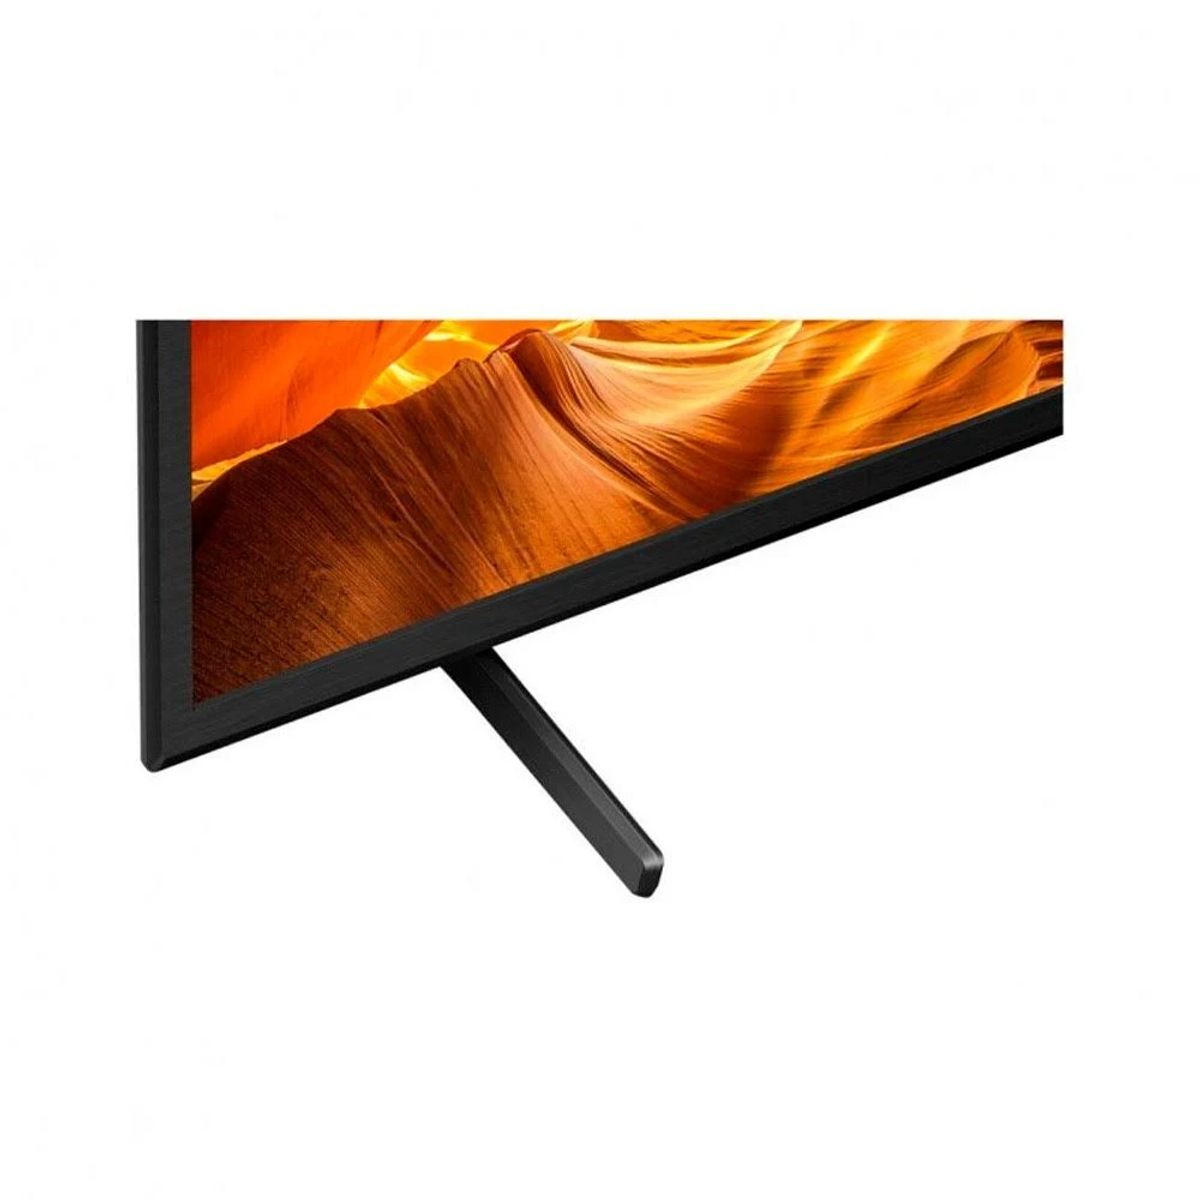 127,00 SONY 50,00 LED Android) / cm, Zoll (Flat, 4K, KD50X73K TV HDR